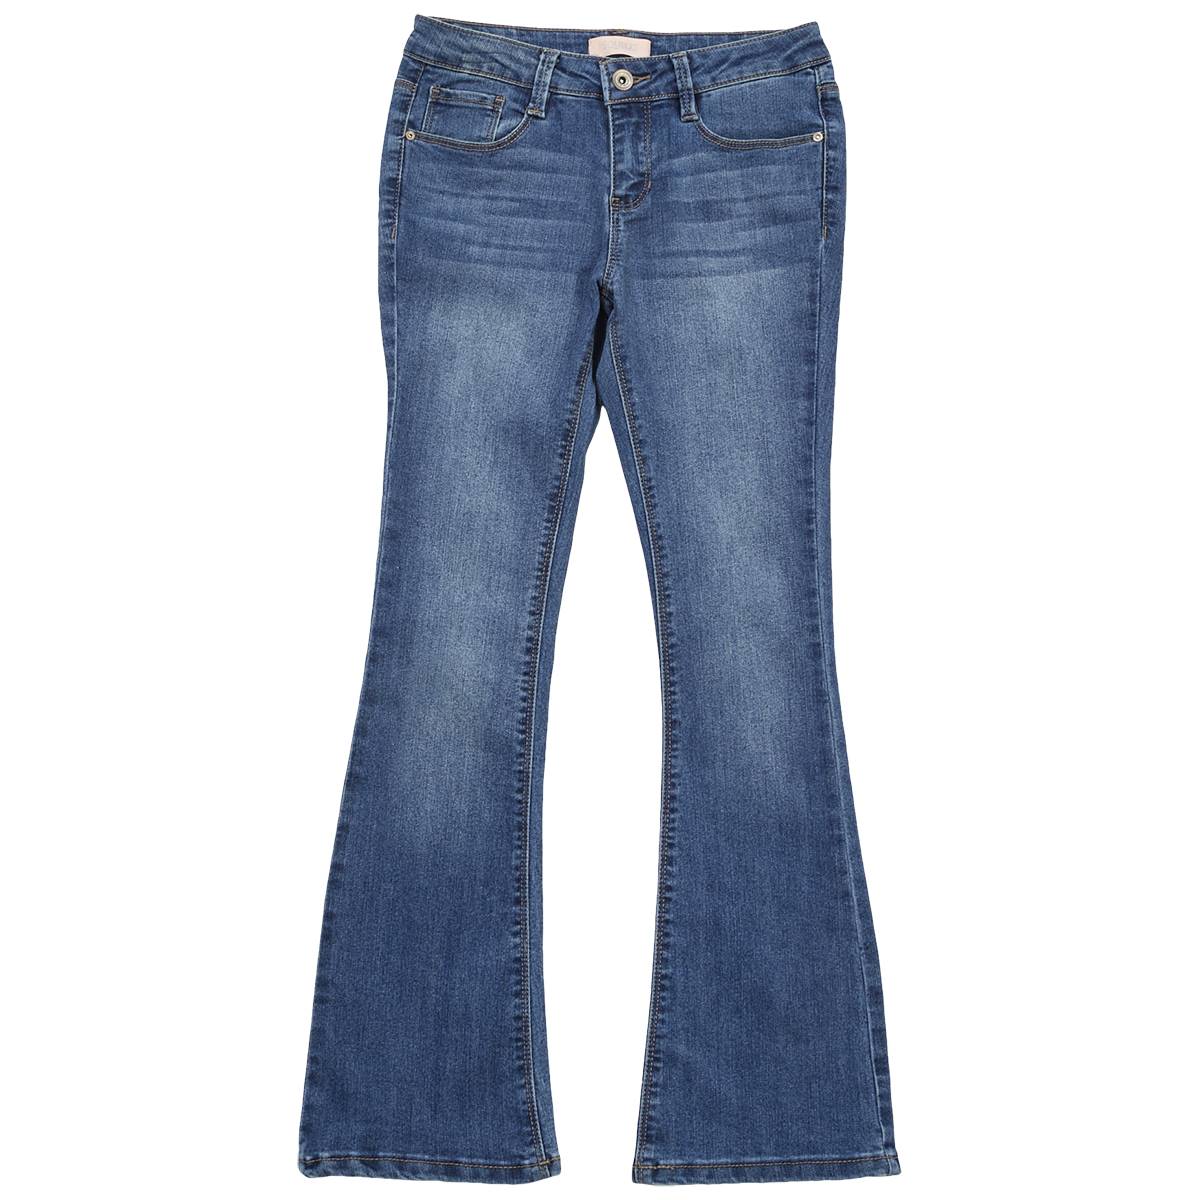 Girls (7-12) Squeeze 5-Pocket Flare Jeans